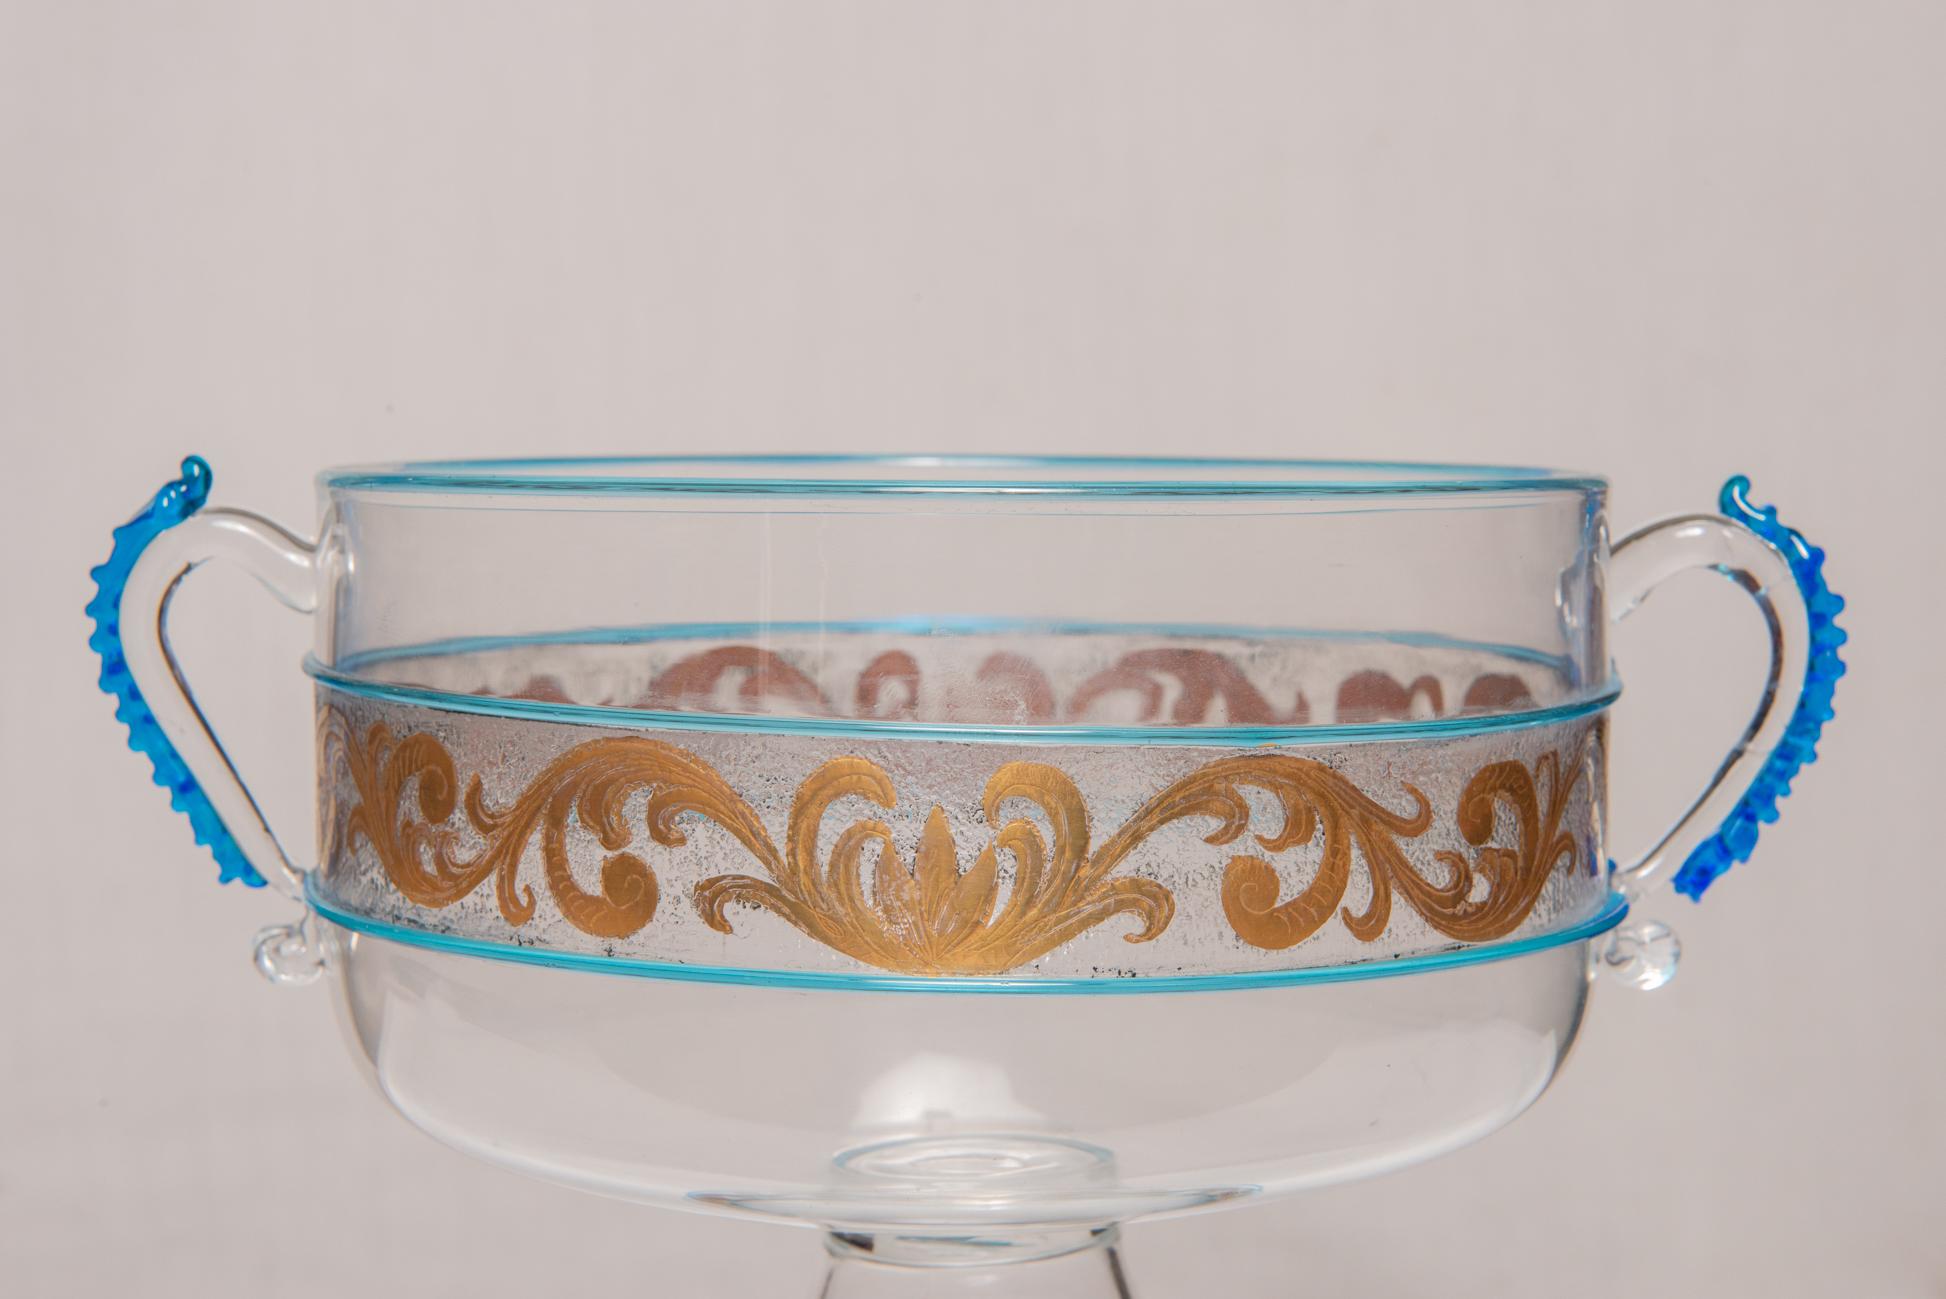 nr. 2110 - Vintage beautiful glass and gold bowl with handles by Morise : cabinet maker in Venice.
Festoons in pure gold, handles with relief details: a very elegant interesting Venetian item with a good price.